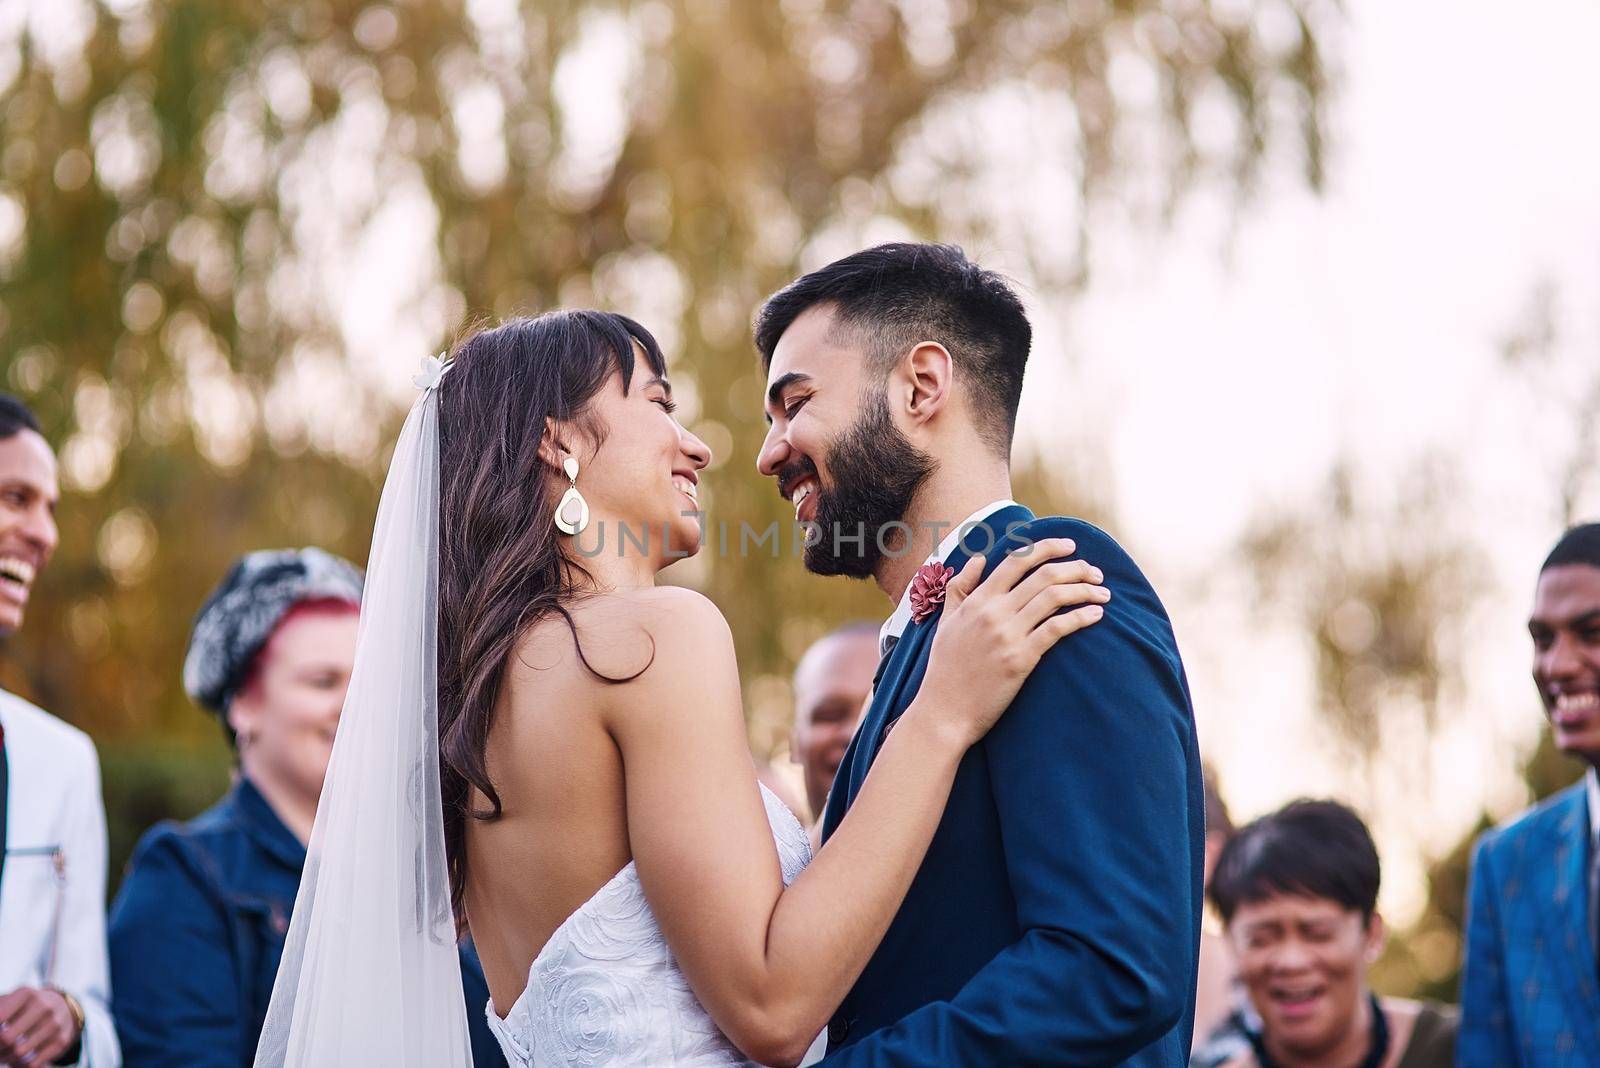 Sharing a moment called happy. an affectionate young newlywed couple smiling at each other on their wedding day with their guests in the background